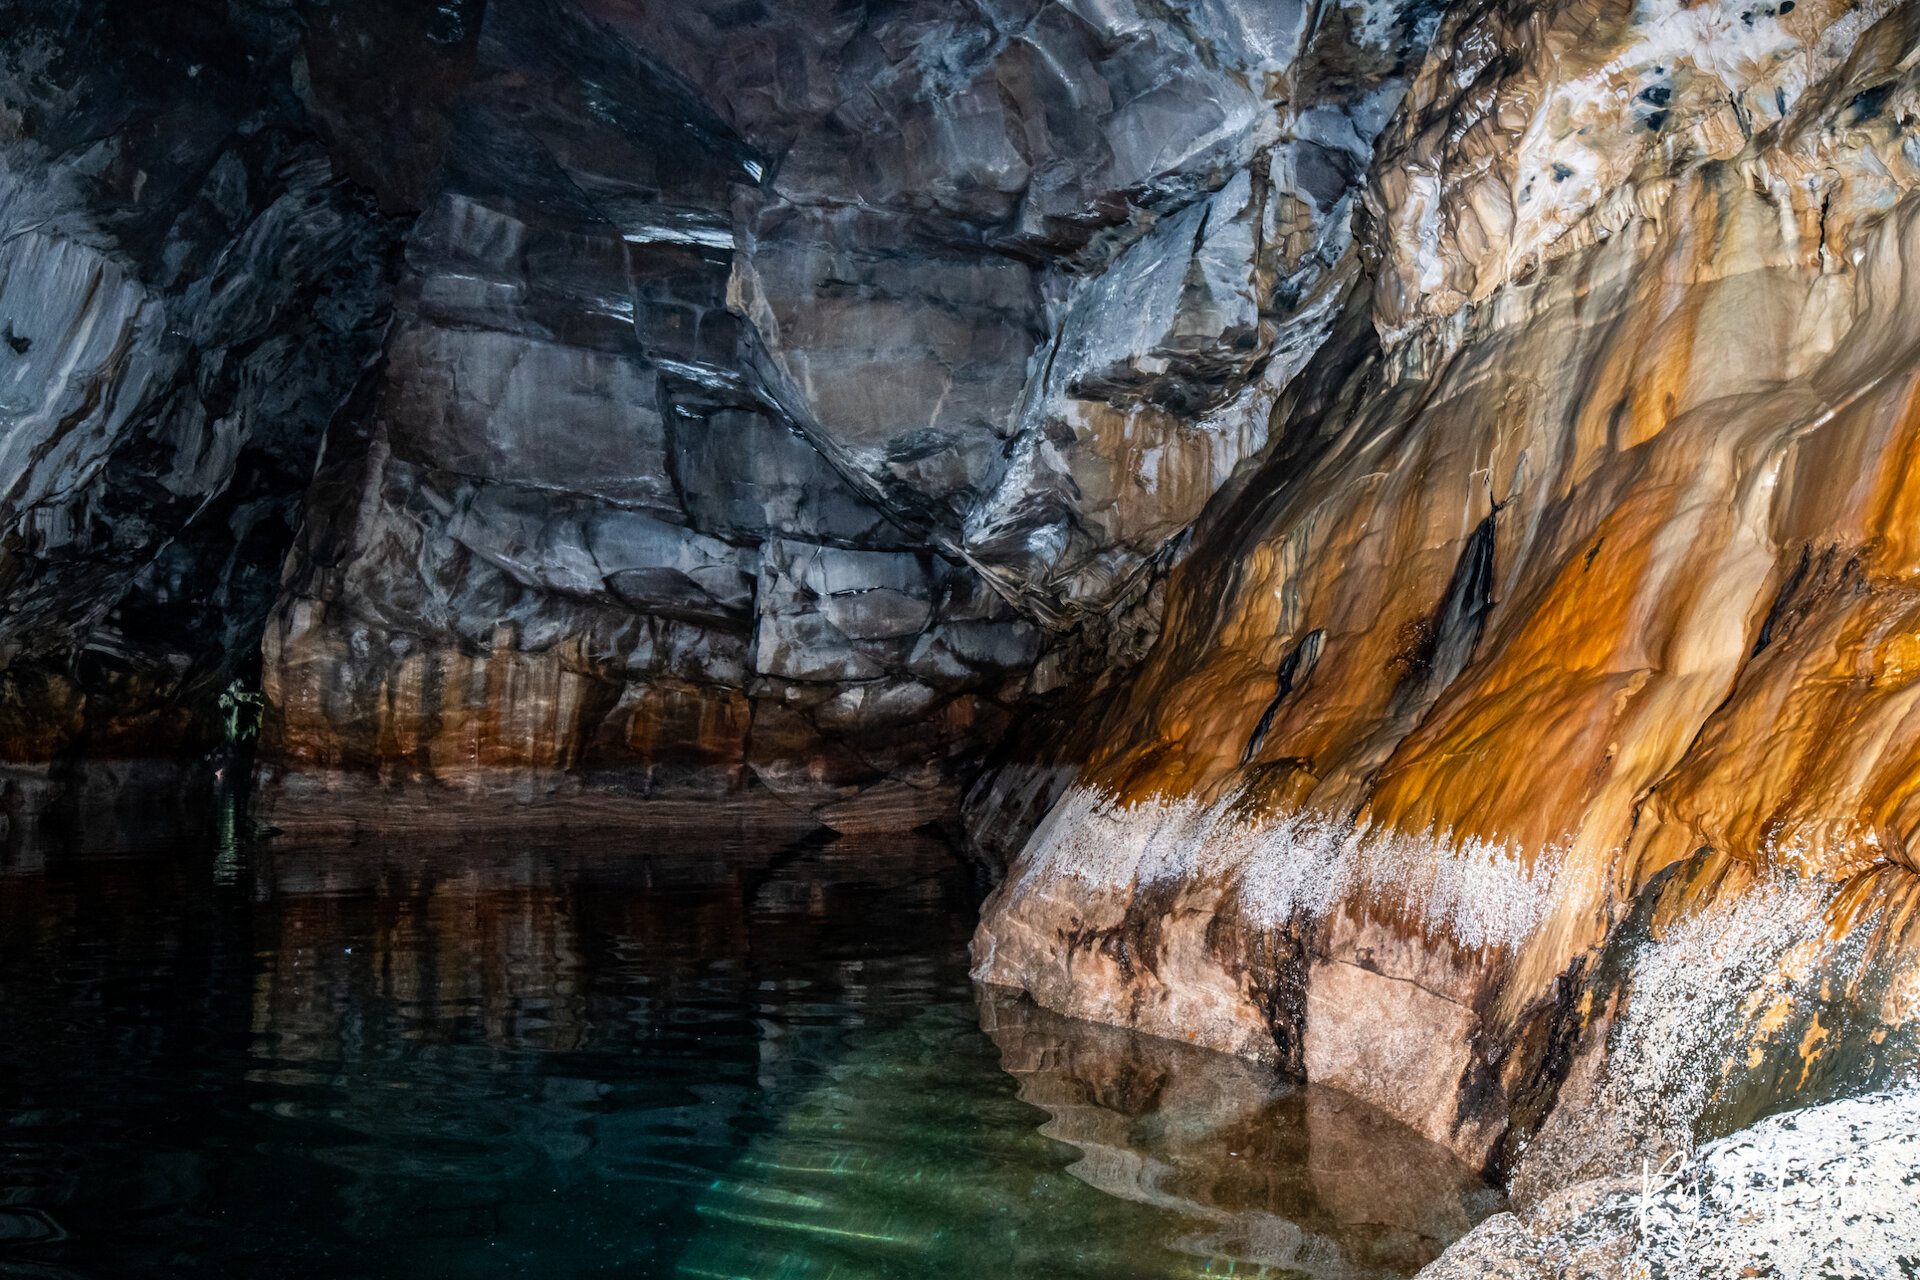 Inside the "Orkneyman's Cave" in Bressay. Photo: Ryan Leith.